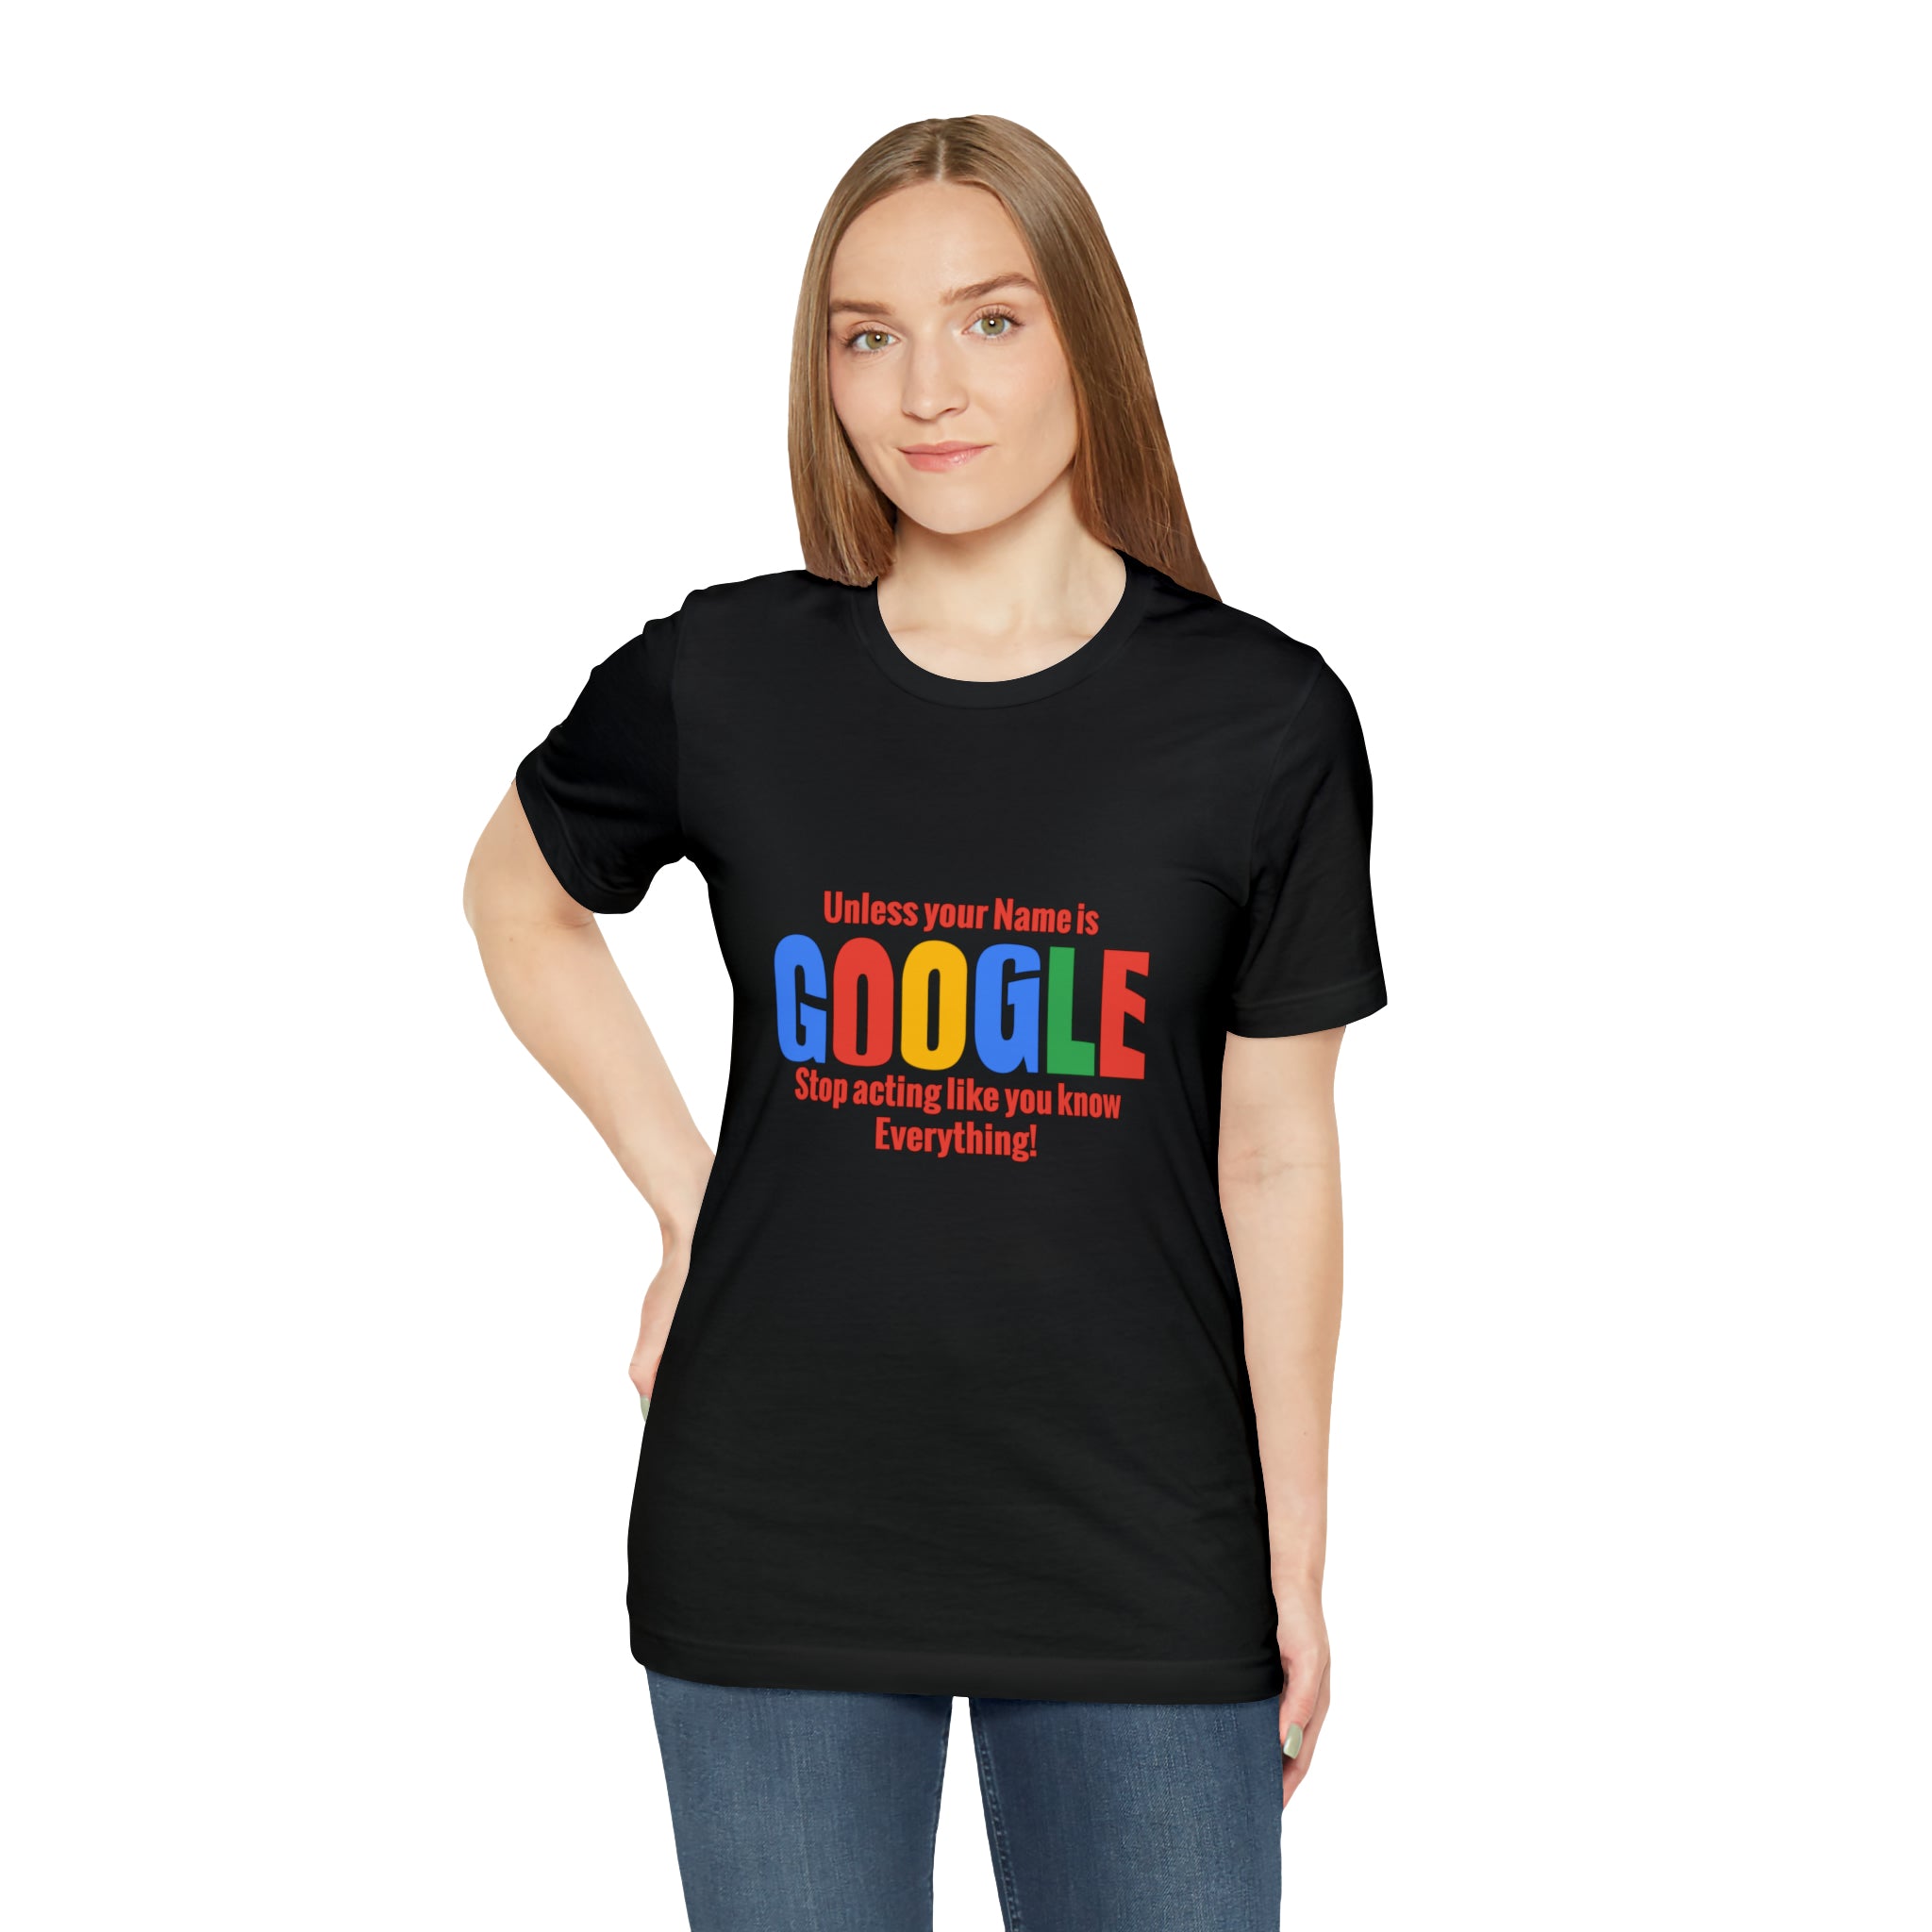 Unless your name is google stop acting like you know everything T-Shirt